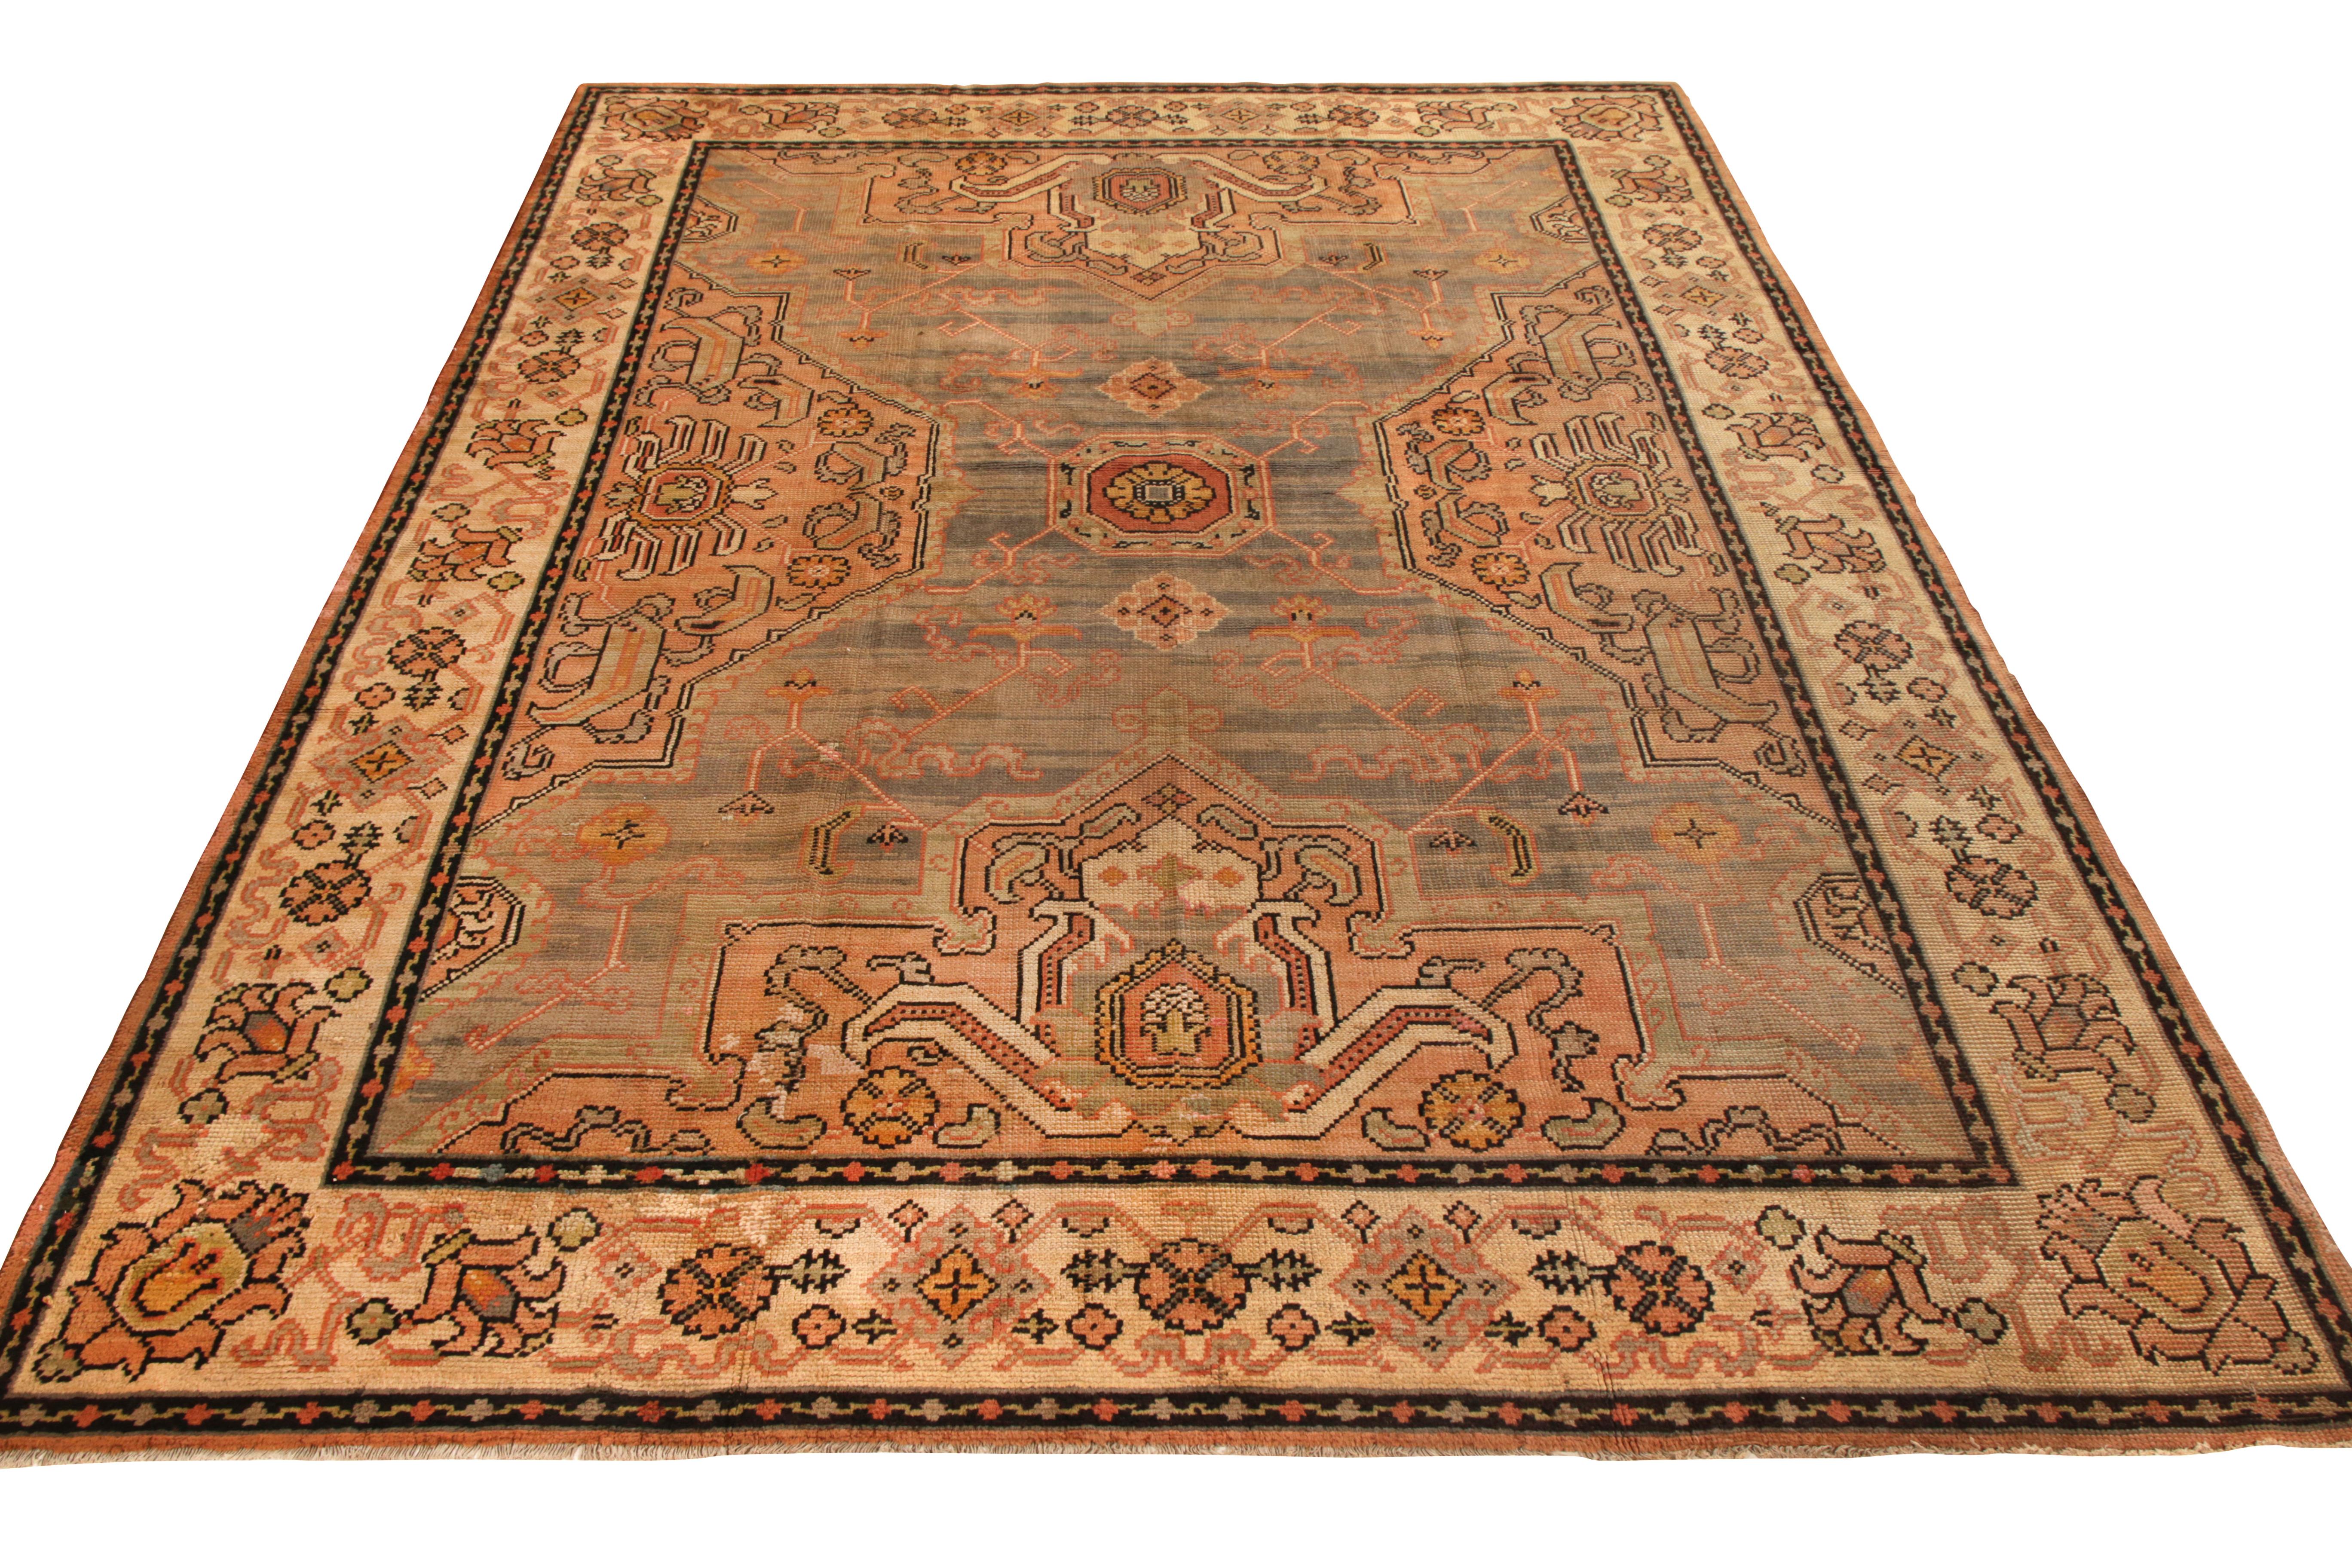 A 10 x 13 ode to rare antique Oushak rug styles, hand knotted in wool originating from Ireland circa 1920-1930. Representing a unique European take on celebrated Oushak designs, an opulent medallion floral pattern enjoys a play of beige-brown and